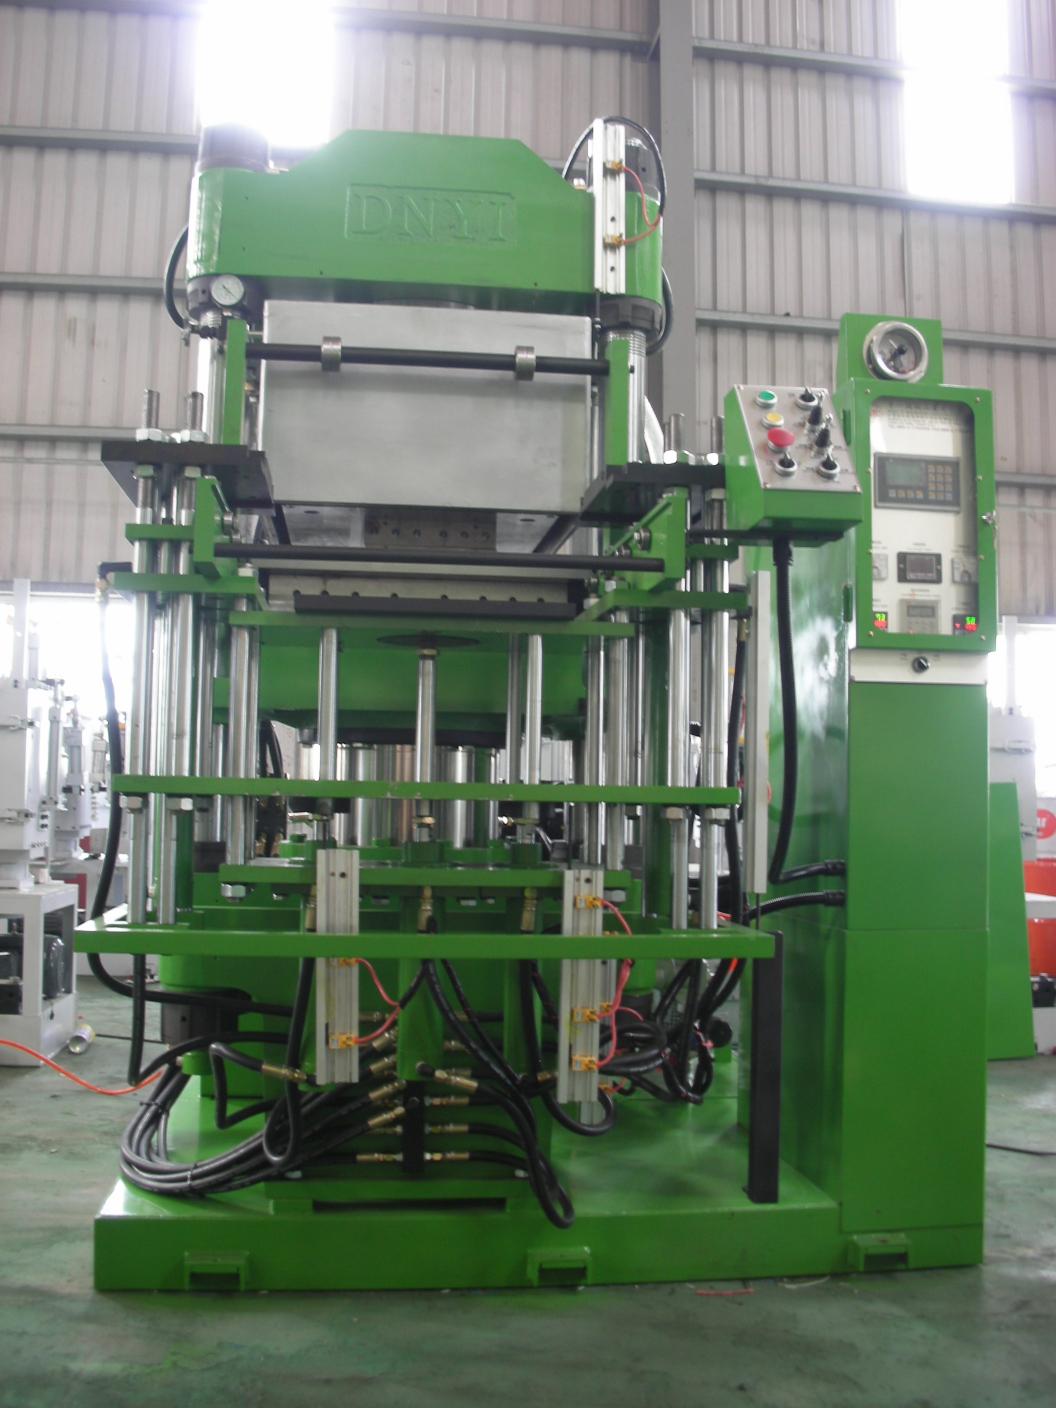 DYPV-S-*-4RT-Vacuum Type Rubber Compression Molding Machine-DYPV-S-*-4RT